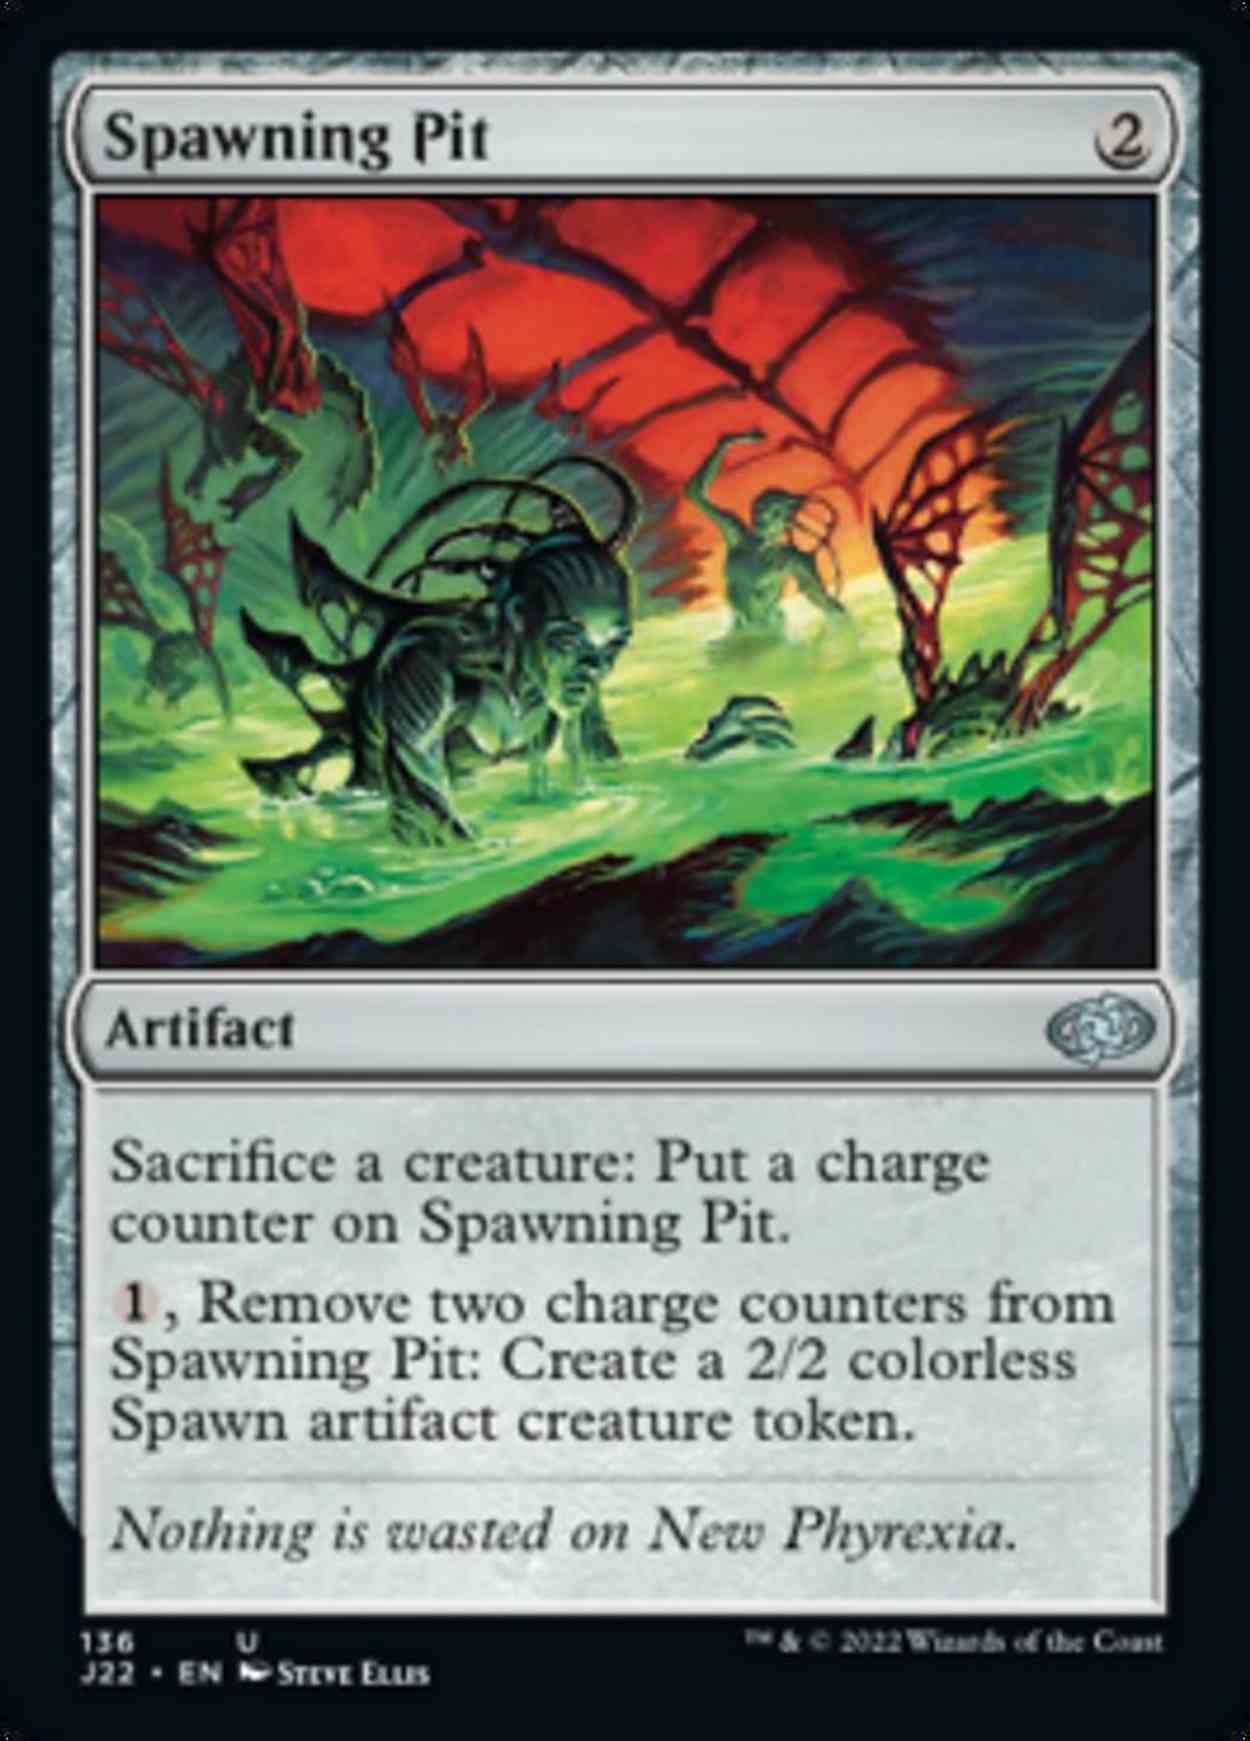 Spawning Pit magic card front